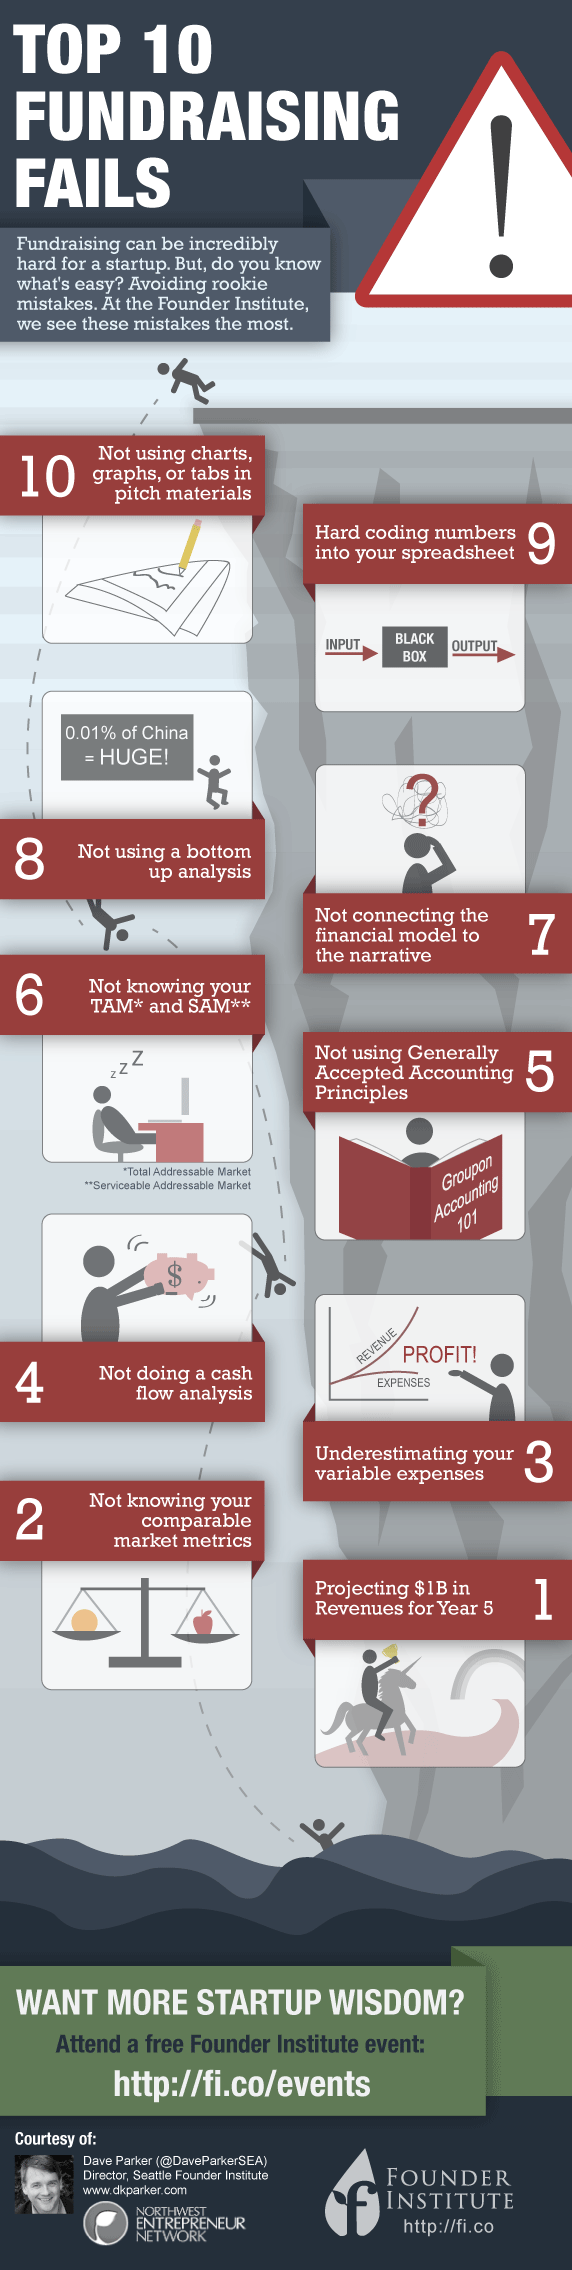 10-startup-fundraising-mistakes-infographic